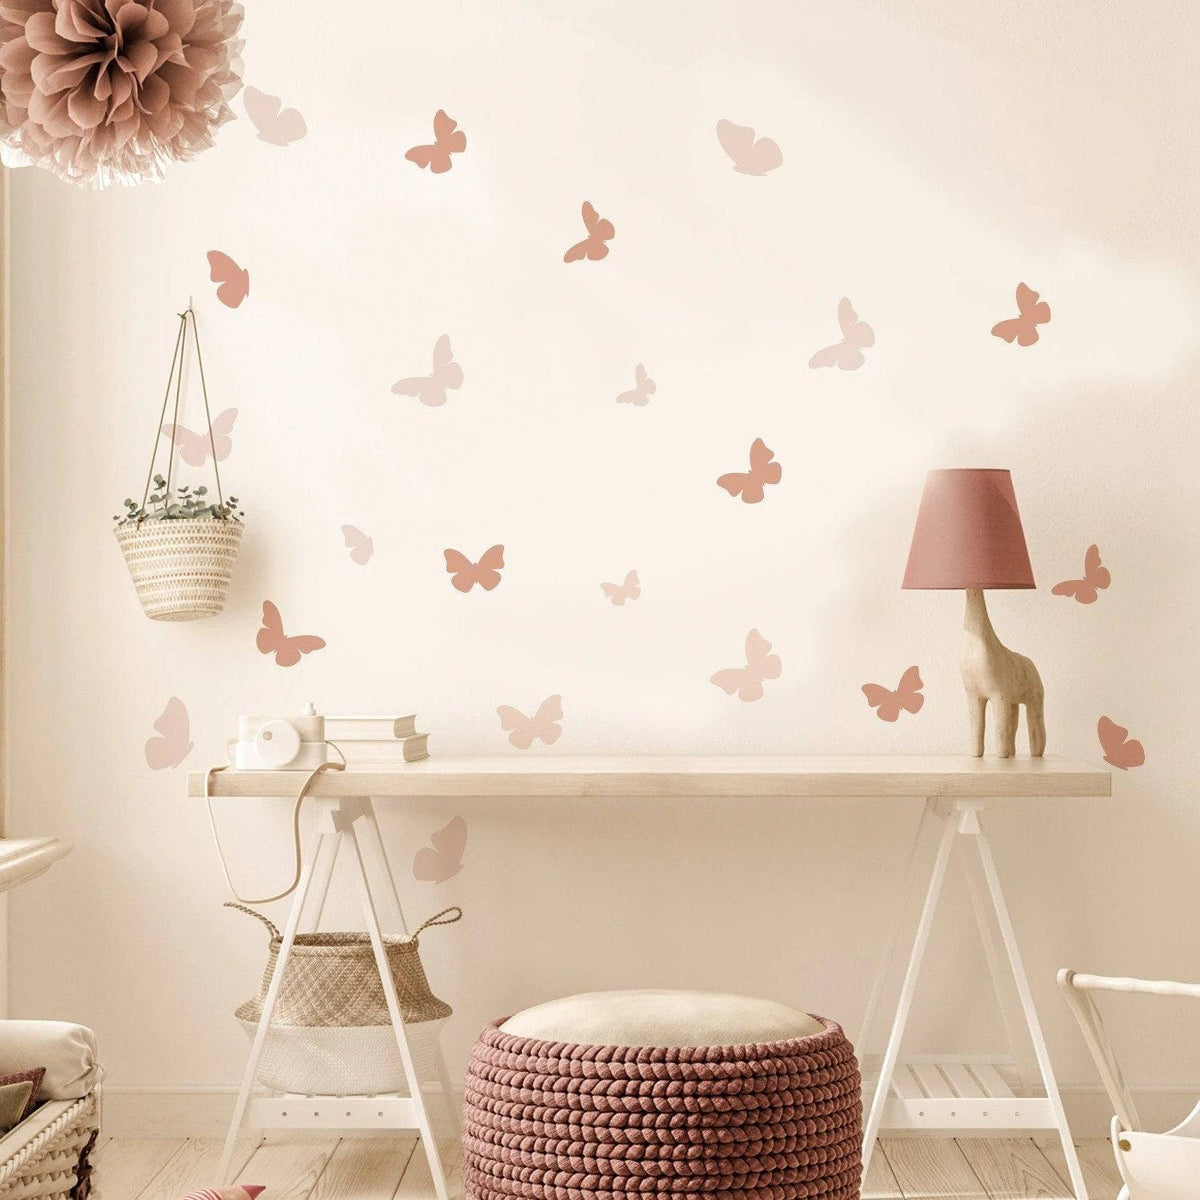 Heart and butterfly Creative Wall Stickers for Kids Room | Heart and butterfly wall stickers for kids nursery